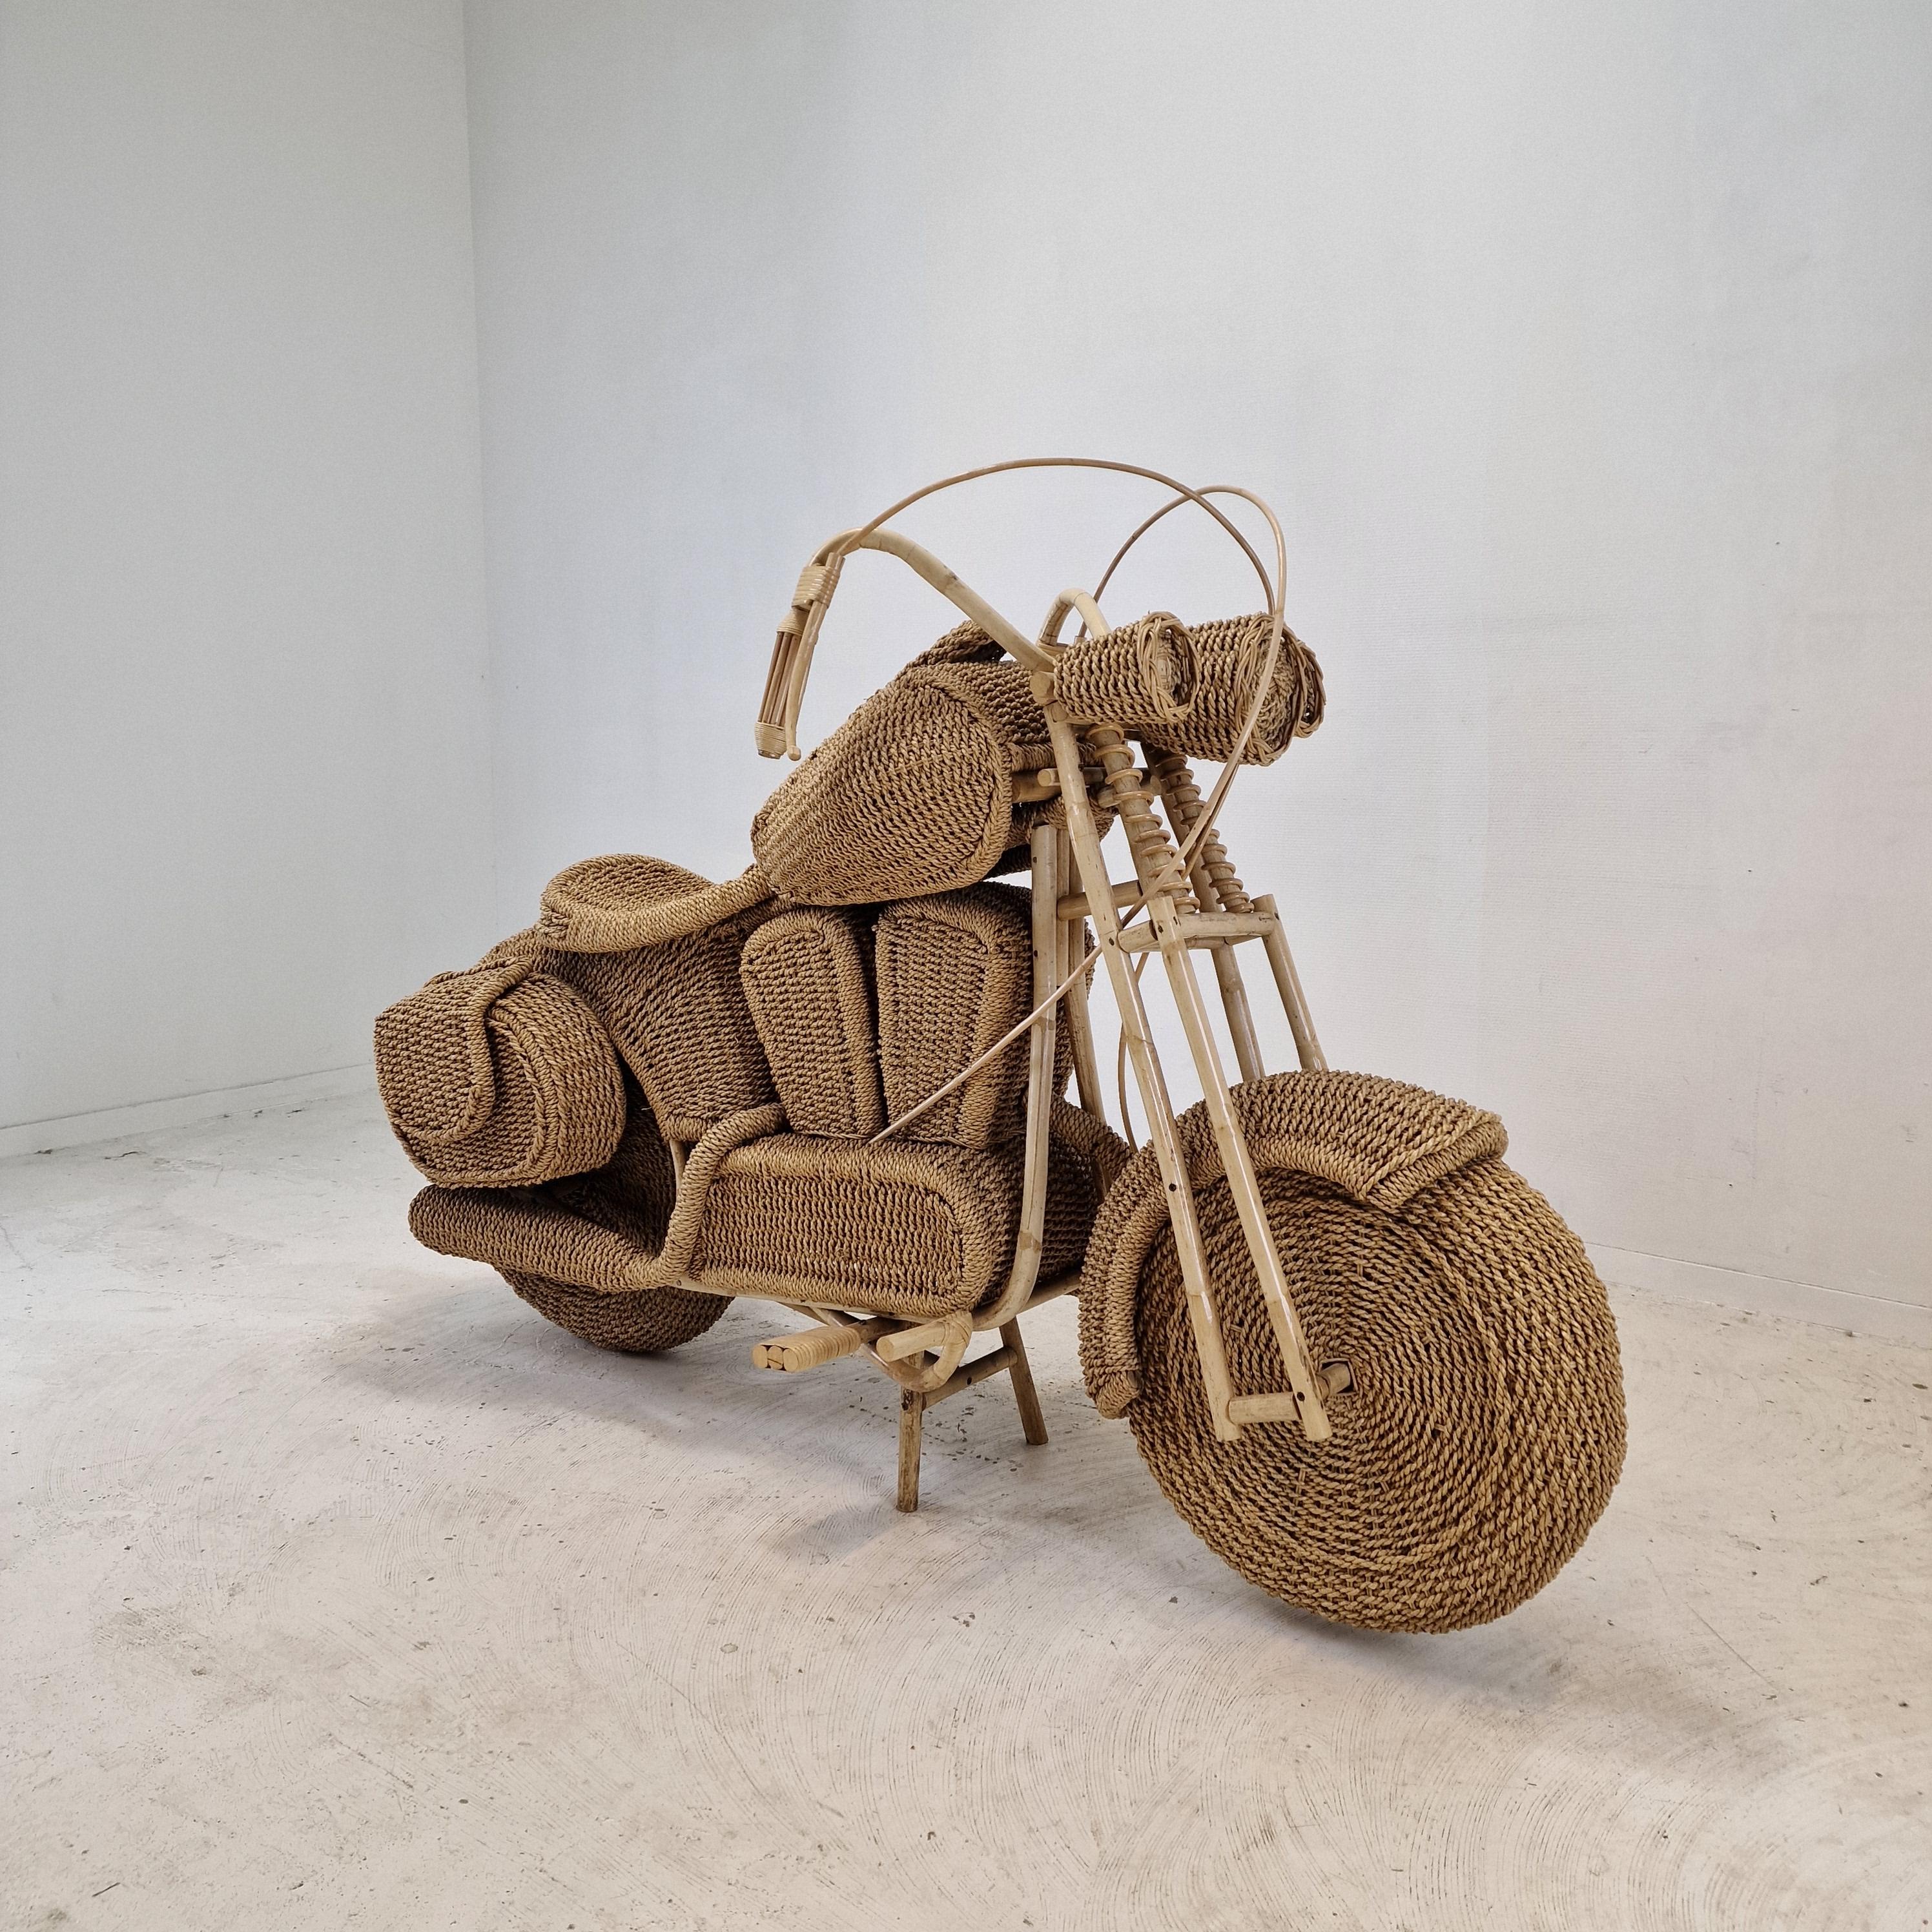 Hand-Woven Tom Dixon Life Size Harley Davidson Motorcycle, 1980's For Sale